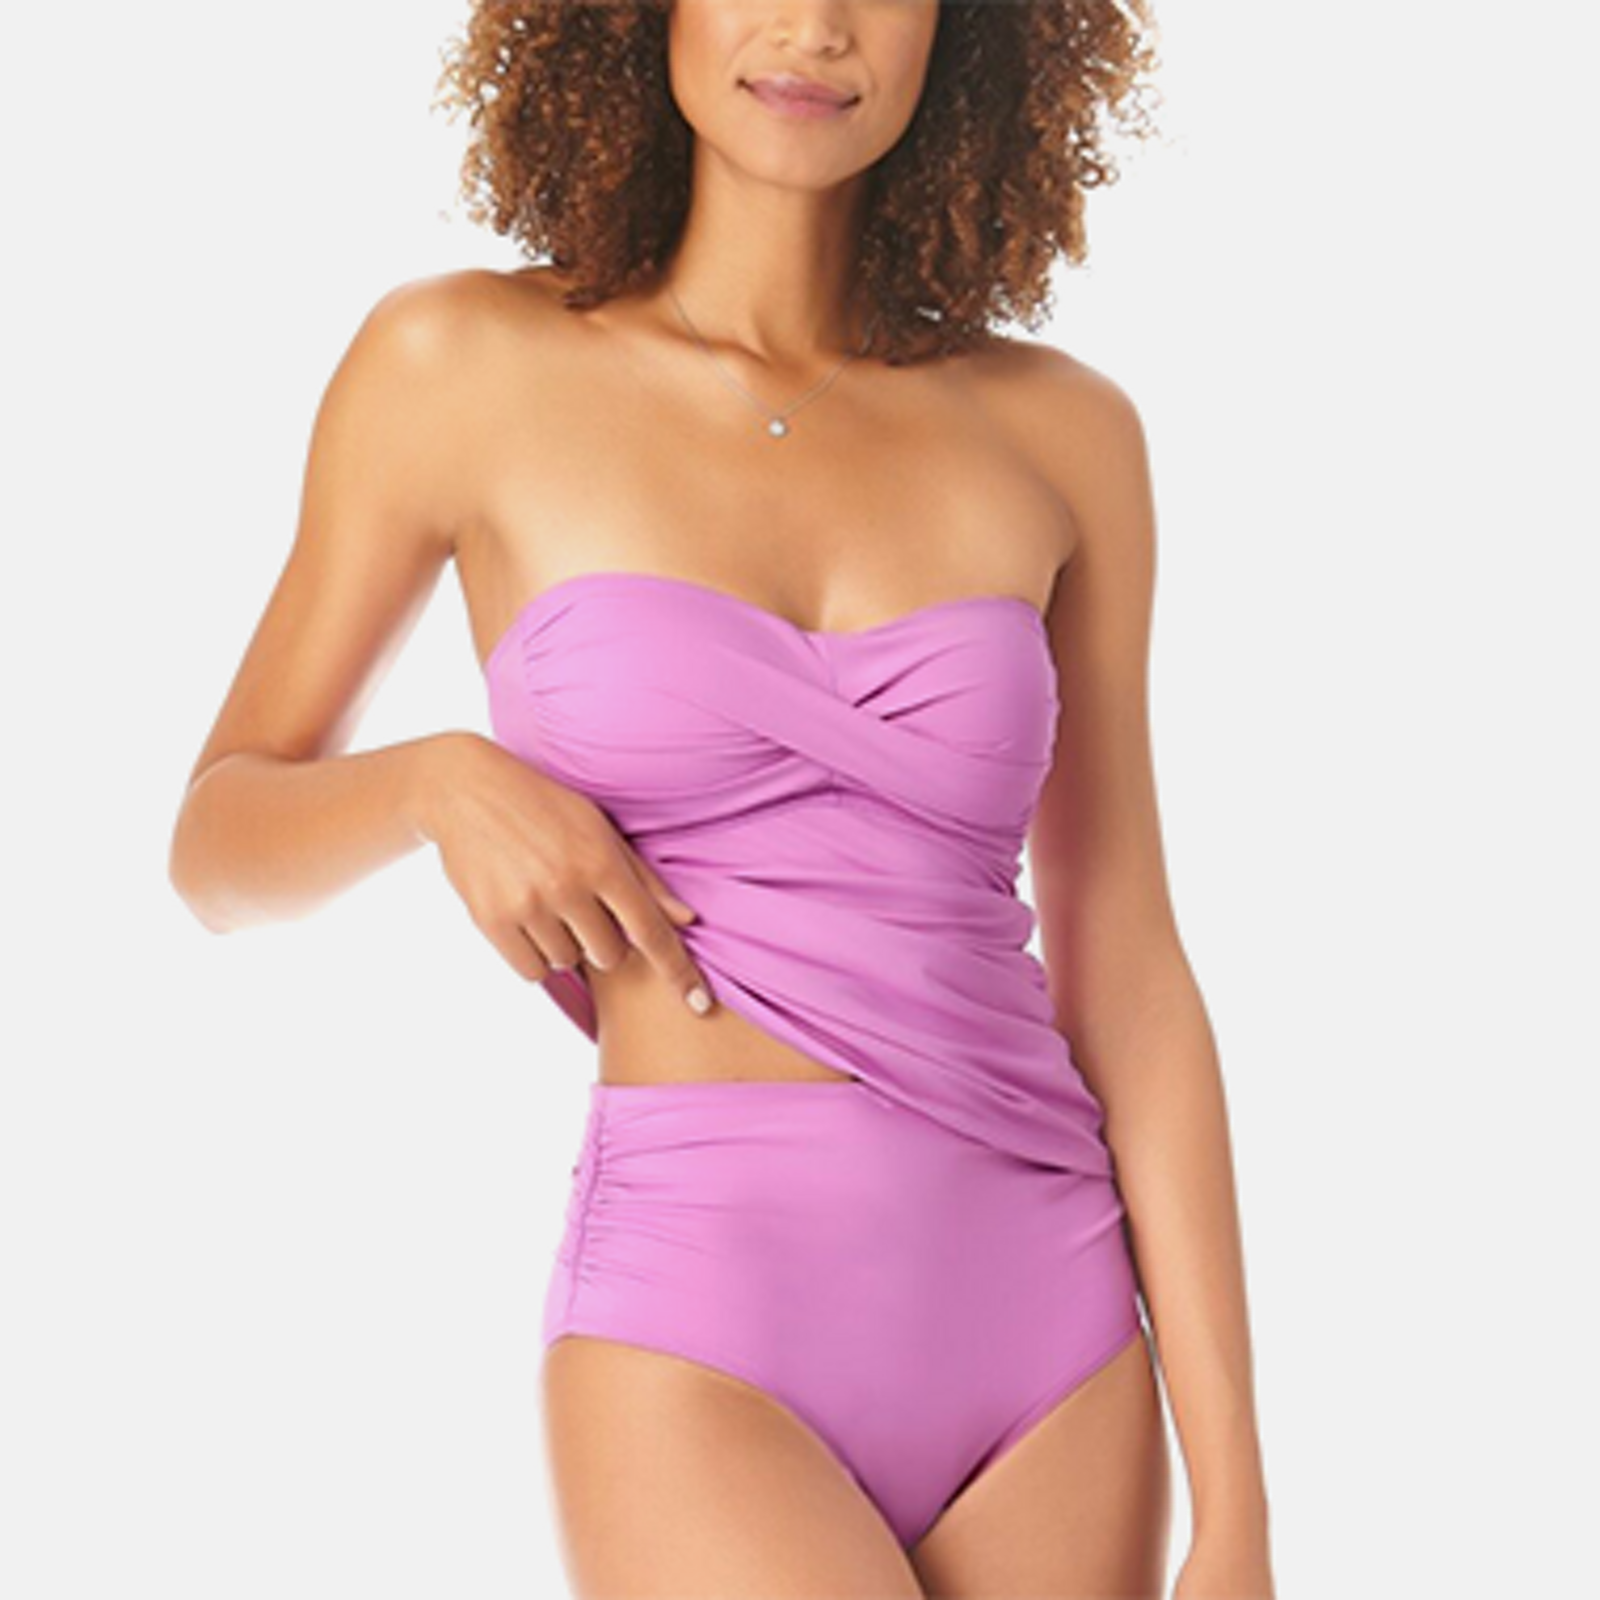 D & DD Cup - Large Bust Women's Swimsuits - Macy's